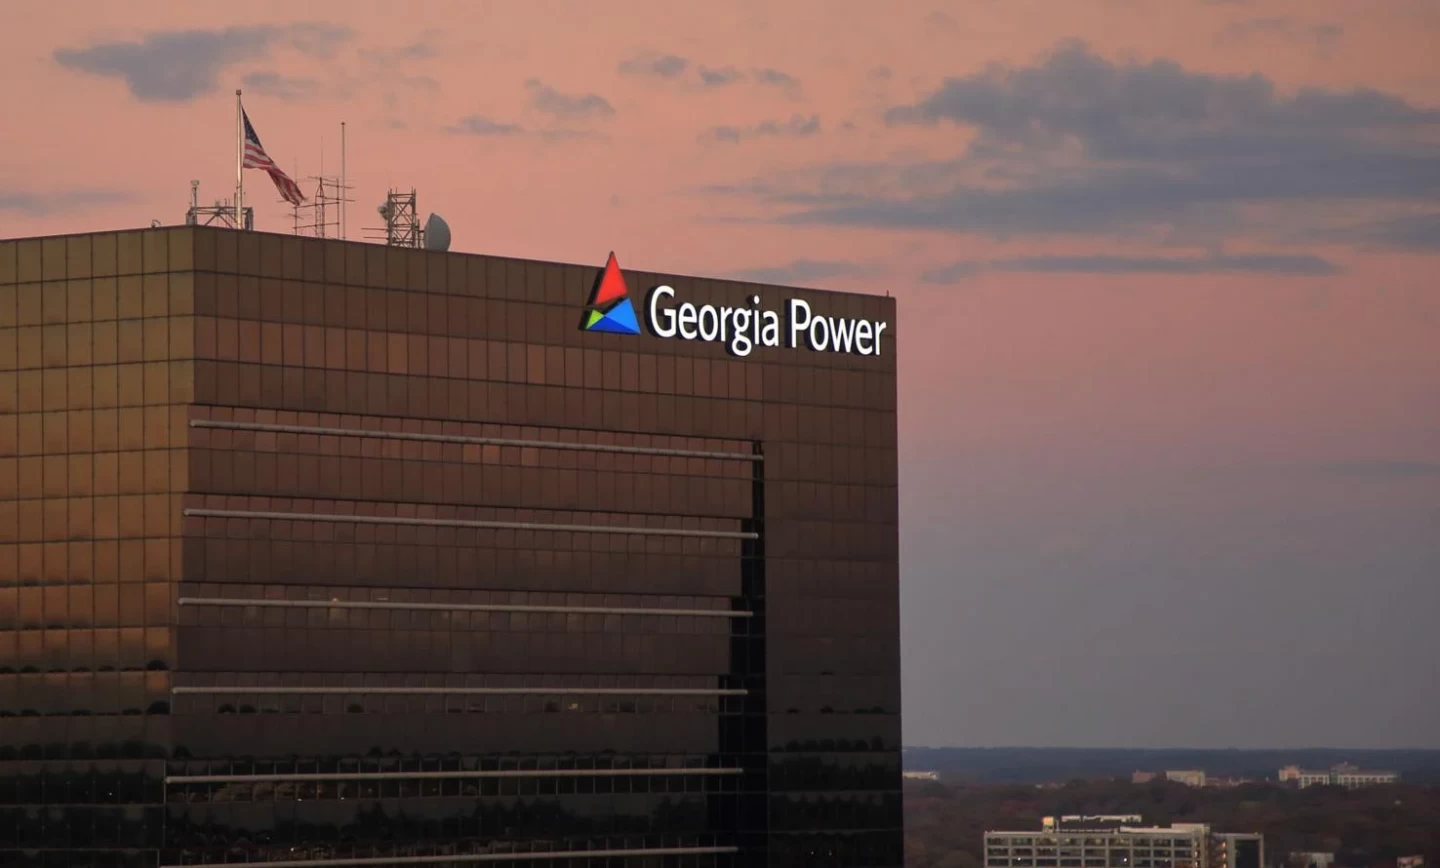 Georgia Power wants 12% rate hike for customers to fund distribution improvements